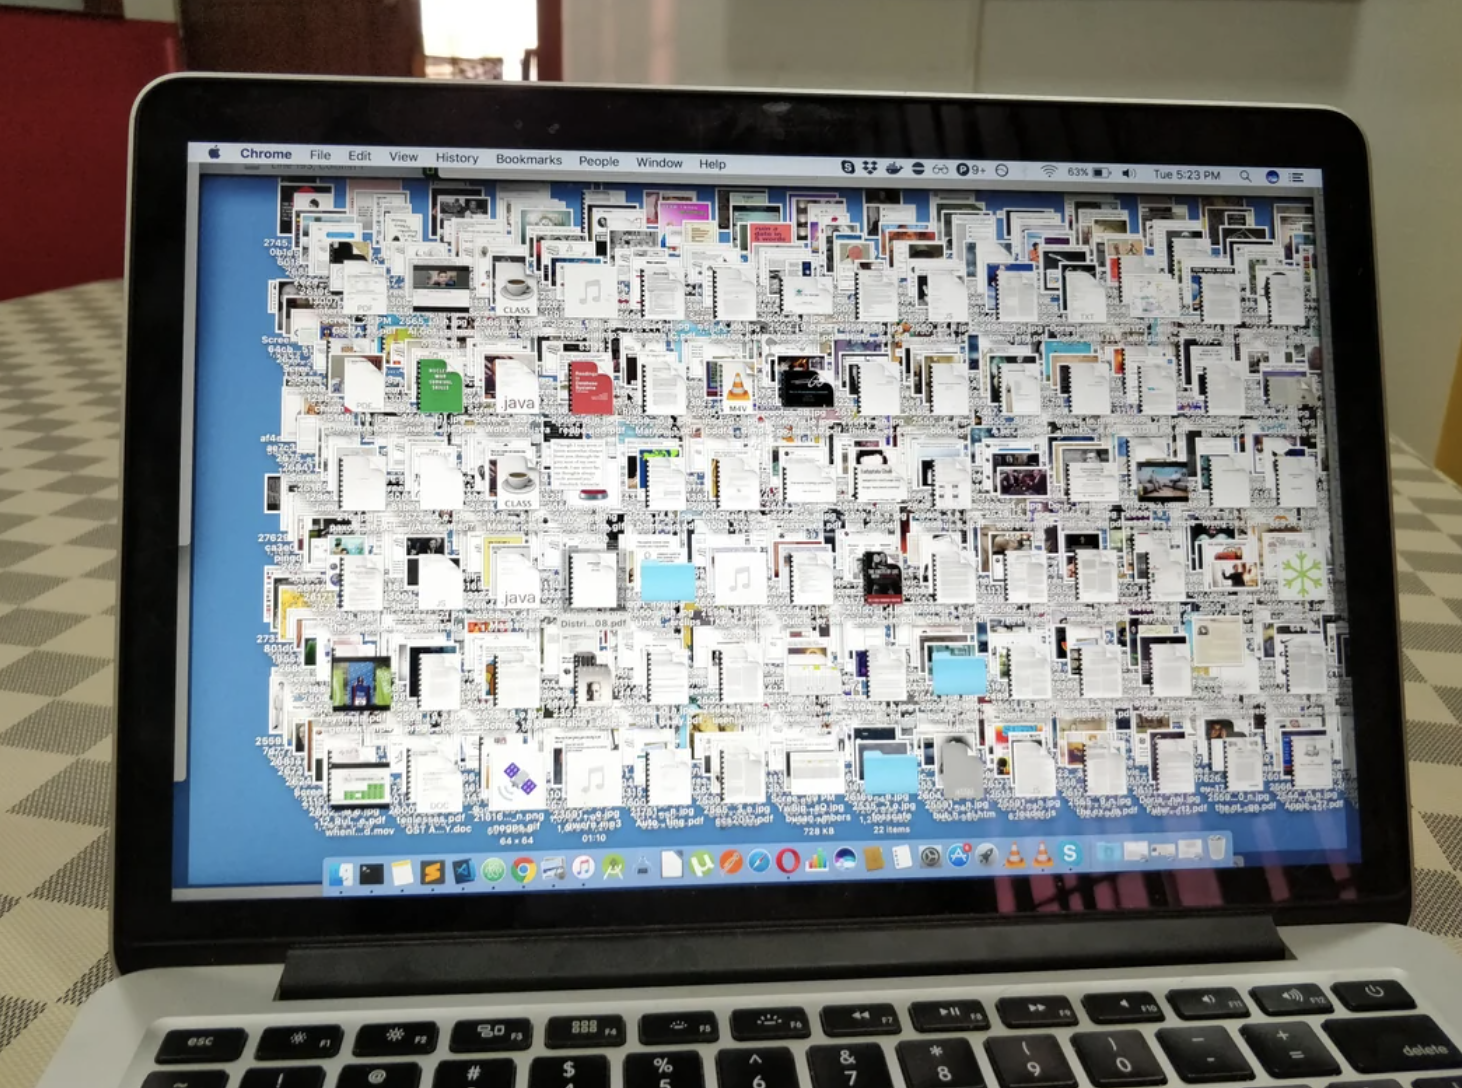 Laptop screen showing an extremely cluttered desktop with numerous overlapping files and folders